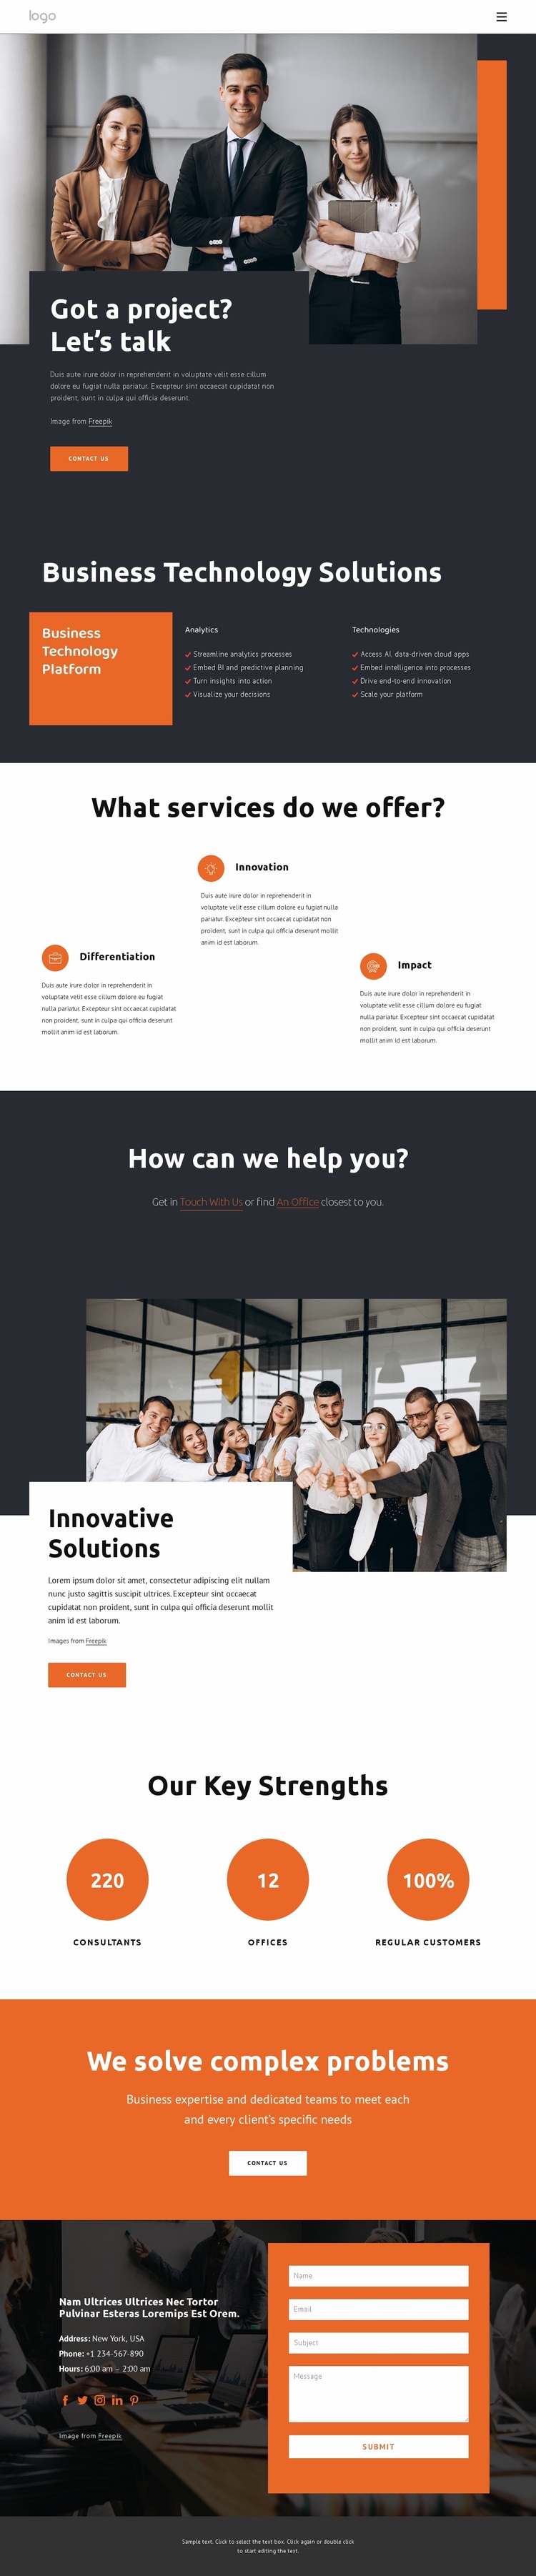 One of the best-known firms Website Design